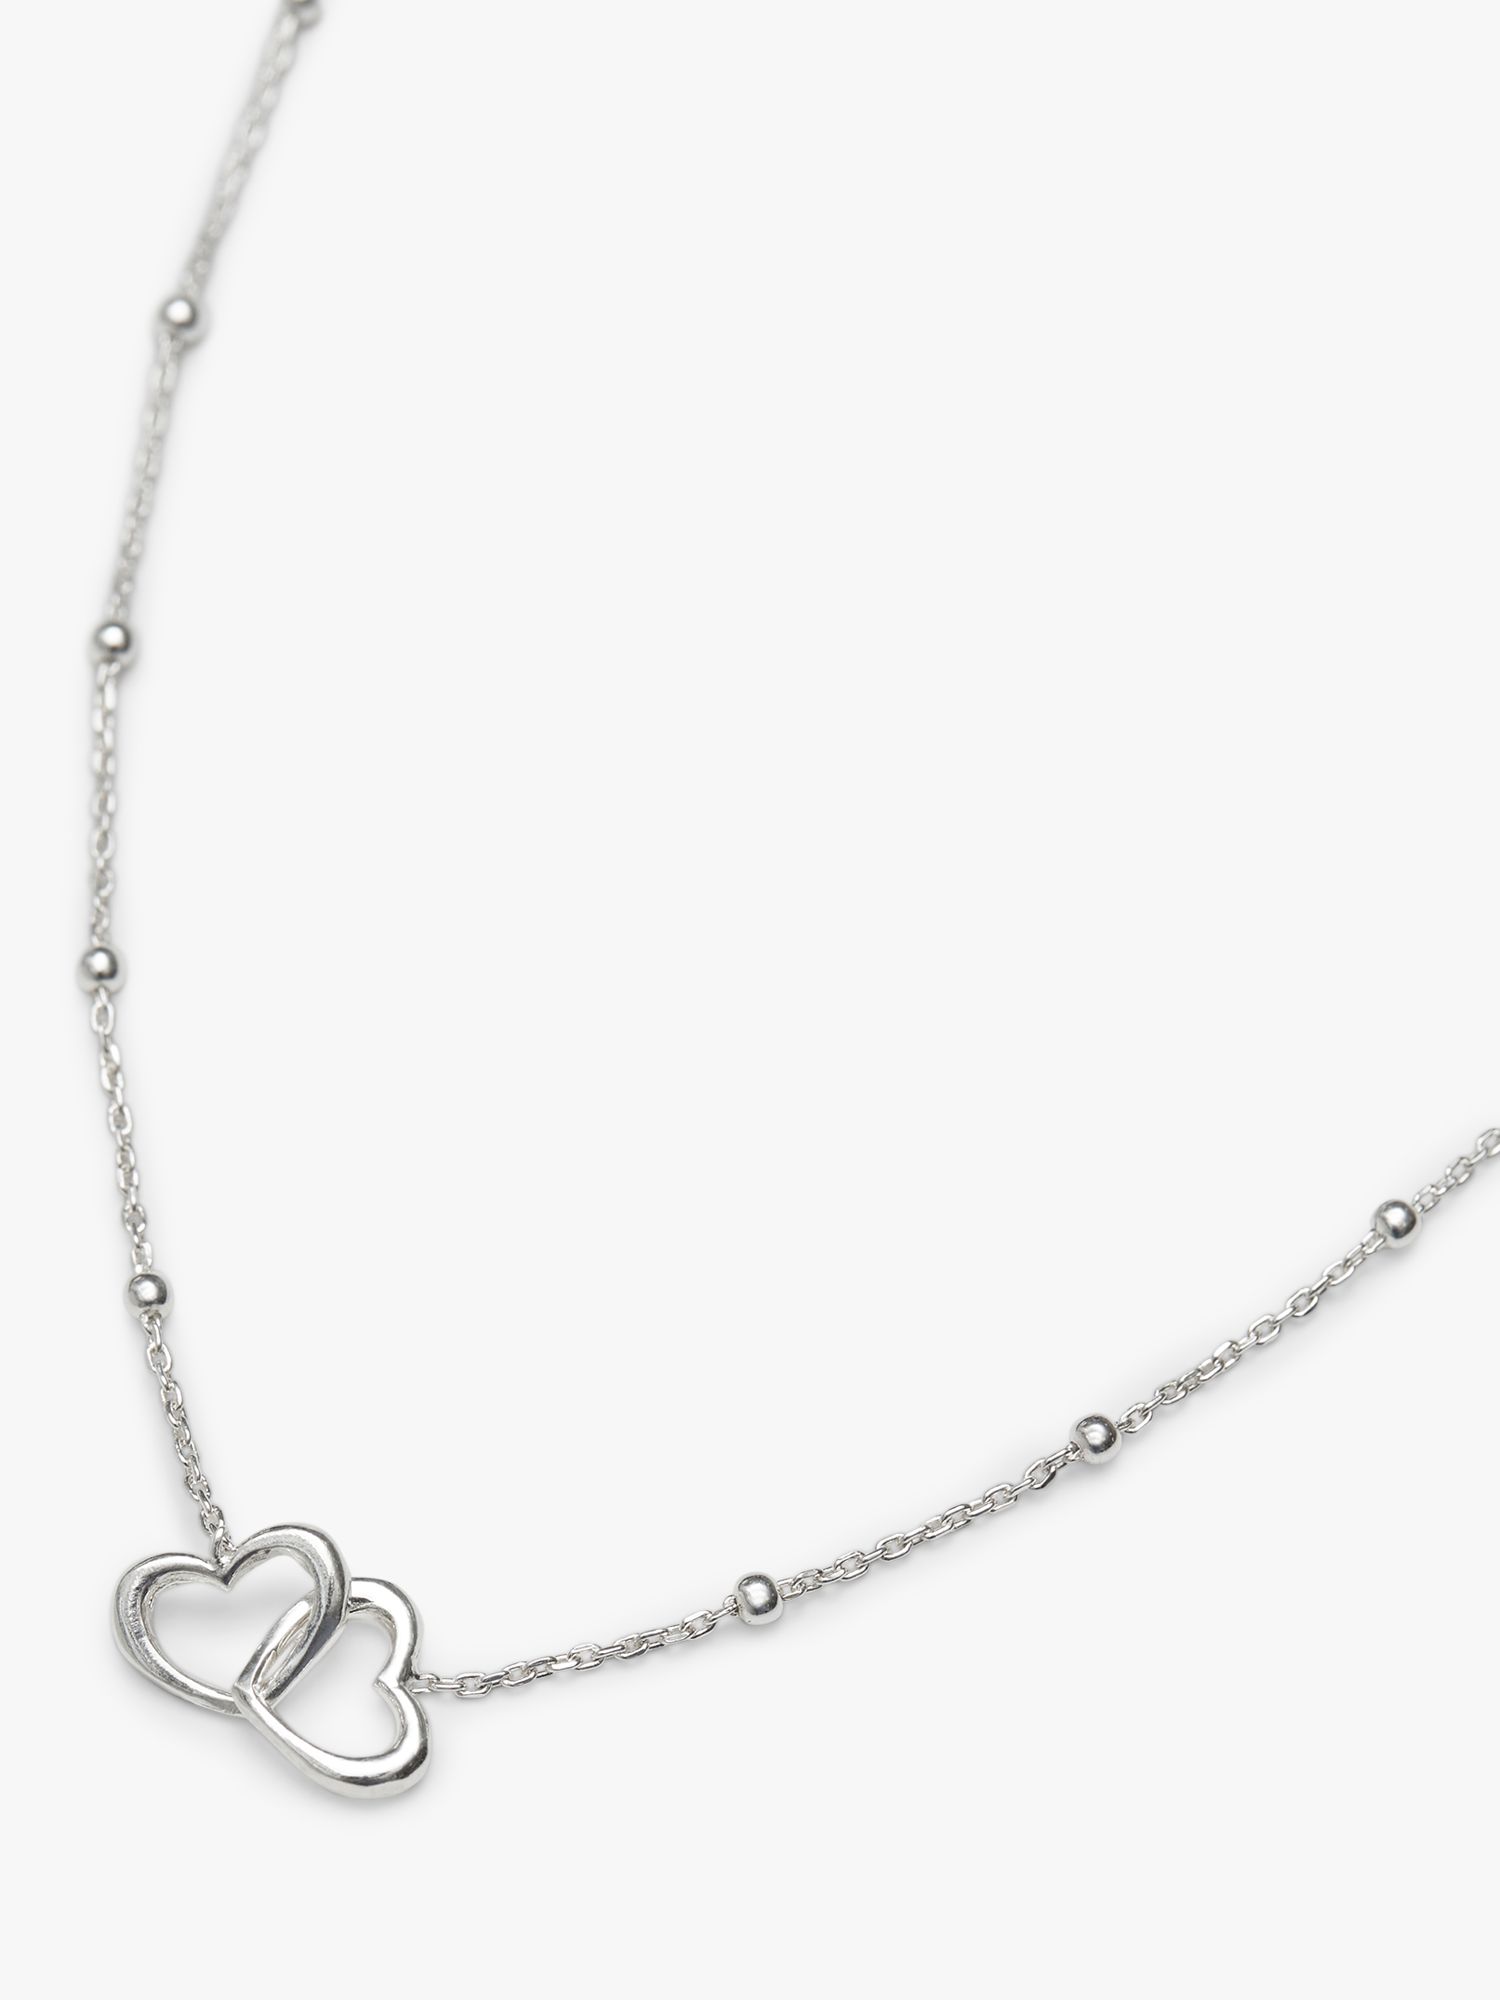 Buy Simply Silver Interlink Heart Necklace, Silver Online at johnlewis.com